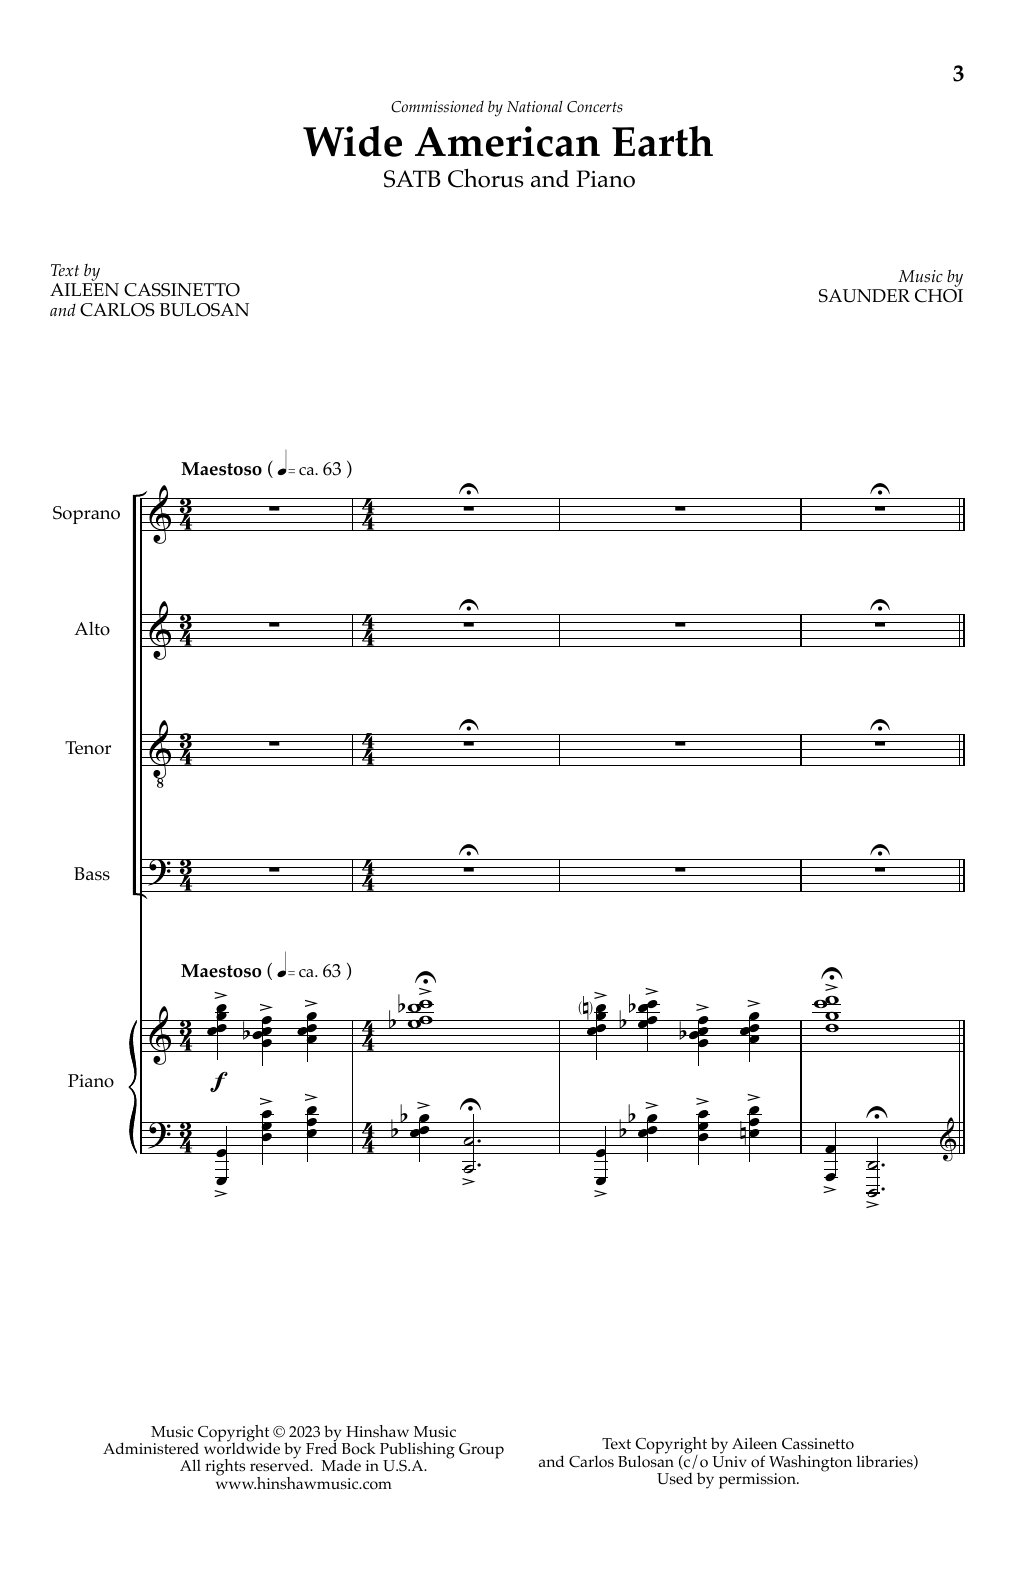 Download Saunder Choi Wide American Earth Sheet Music